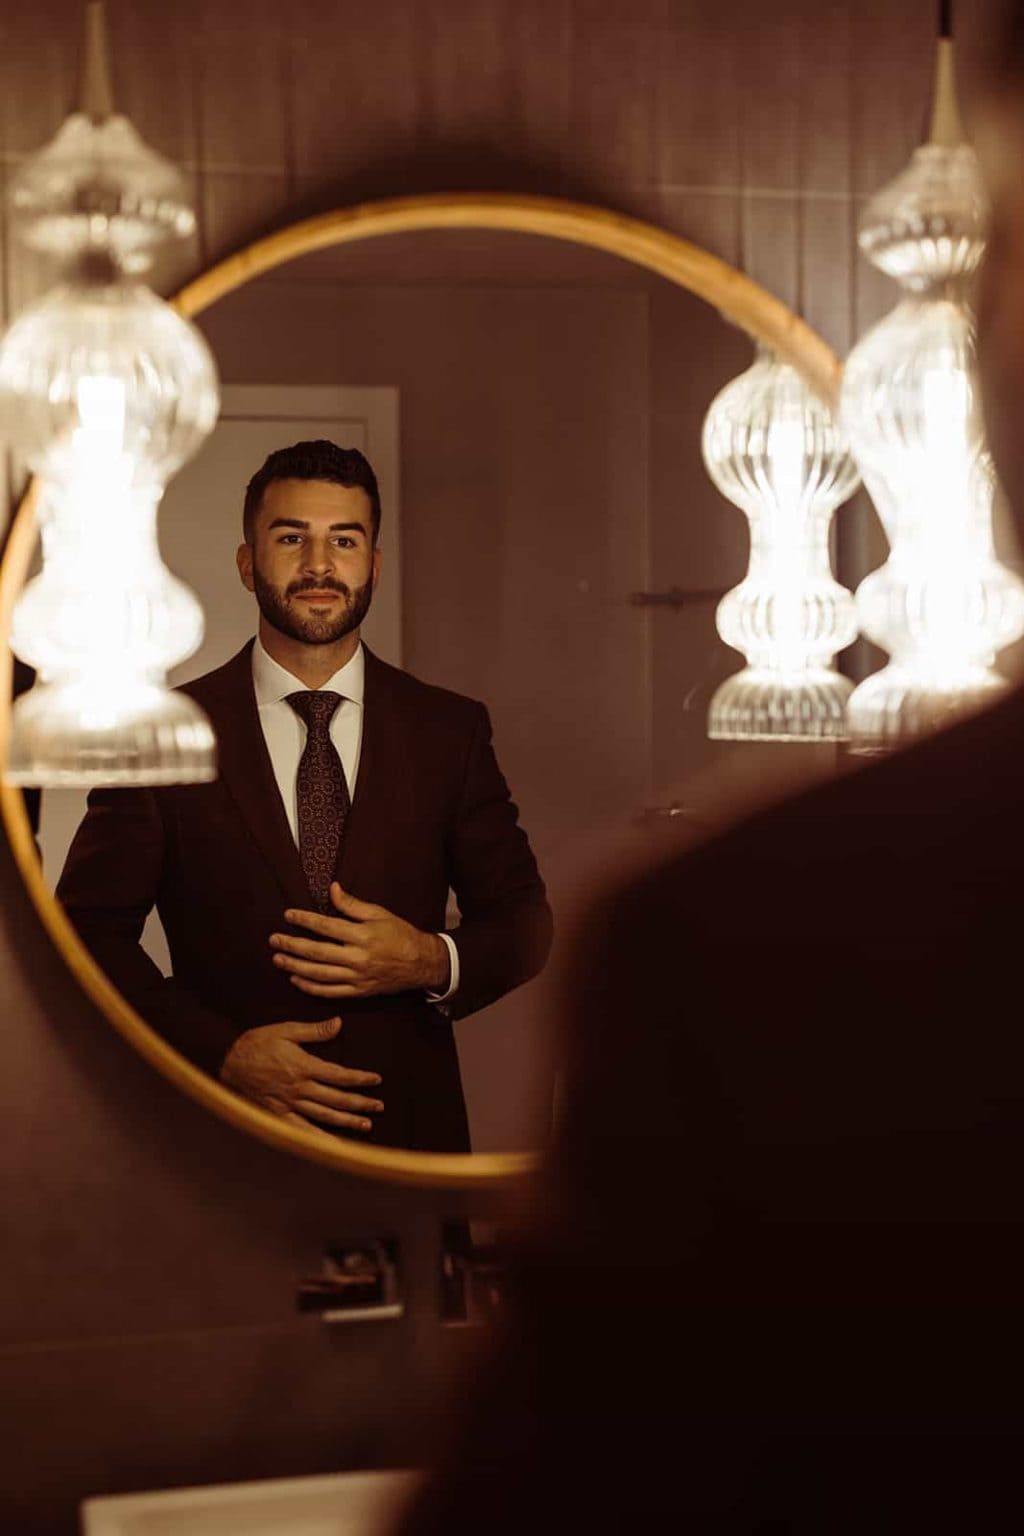 A groom gets ready in front of a mirror